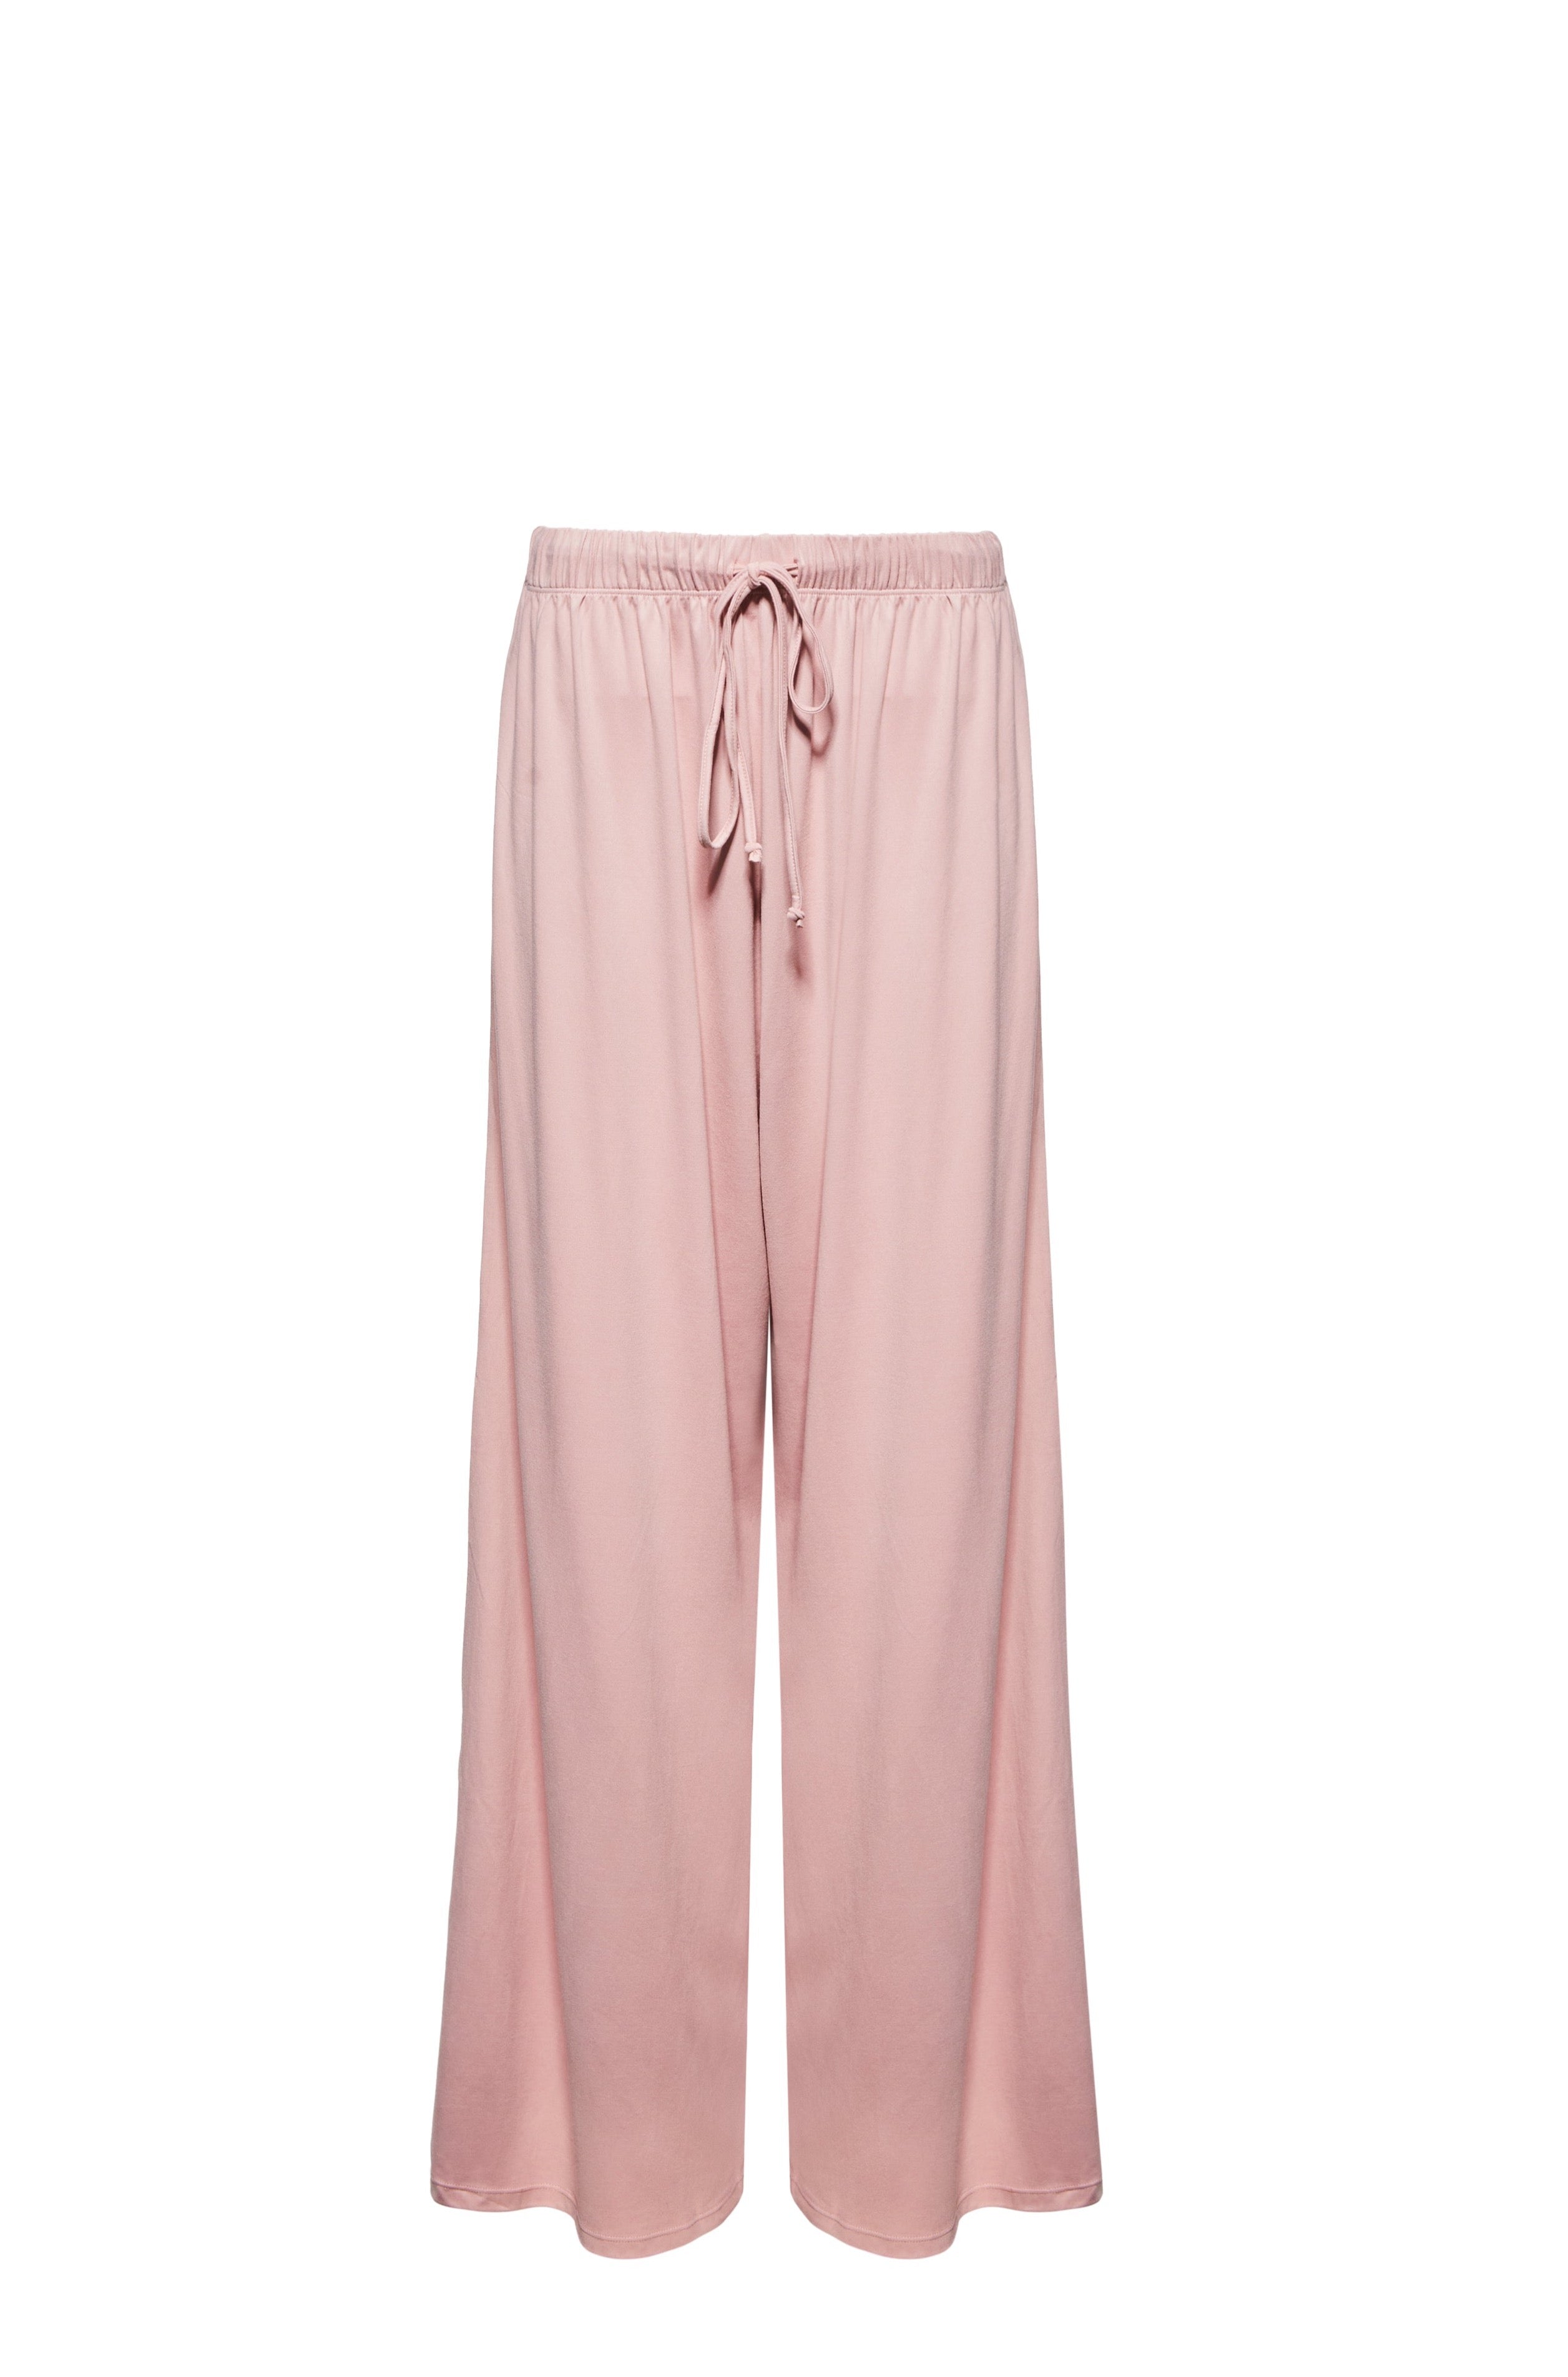 Buy Baby Pink Palazzo Pant Cotton for Best Price, Reviews, Free